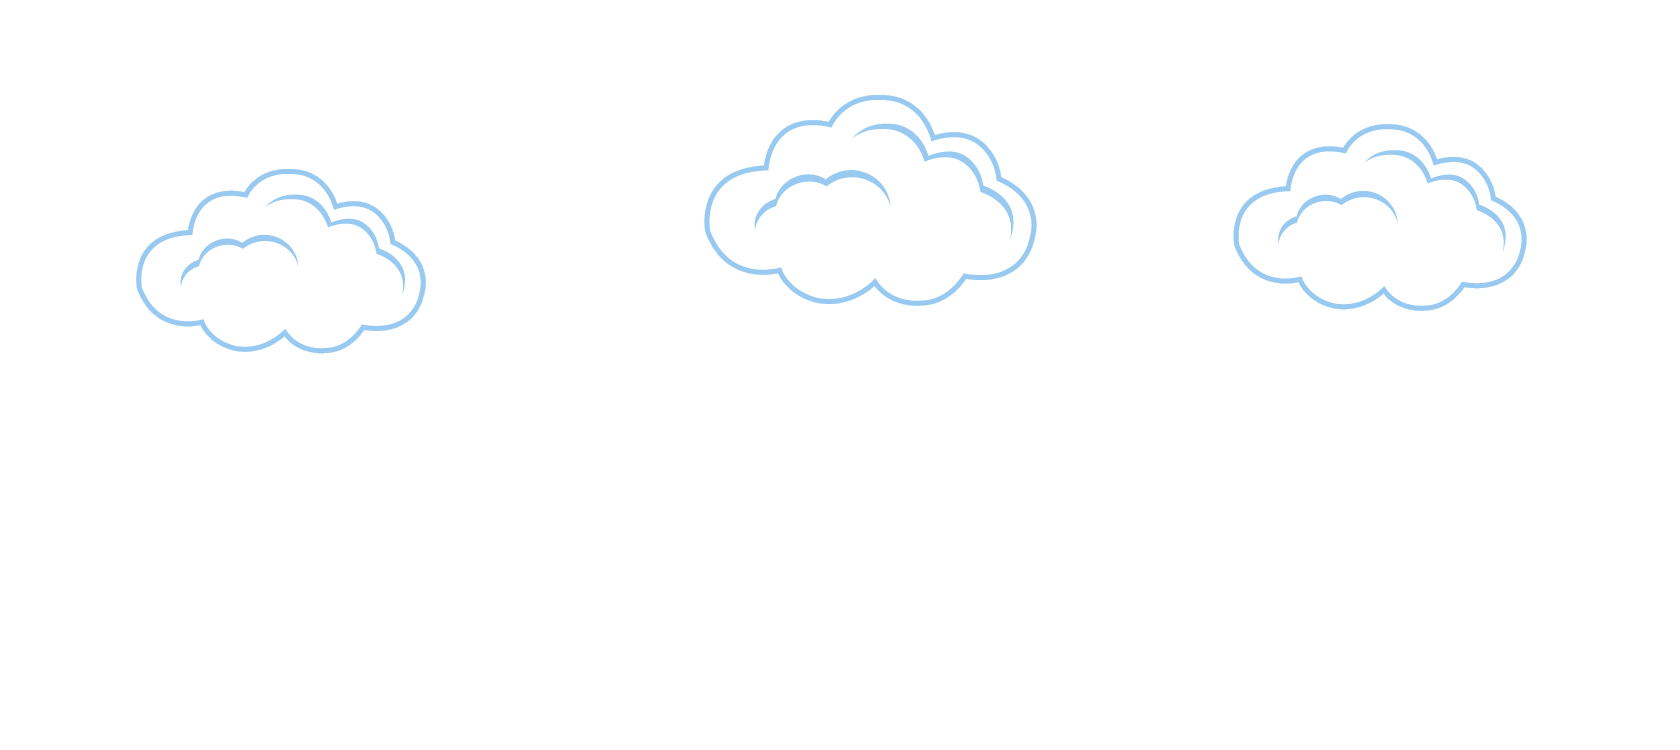 outside clipart cloudy sky